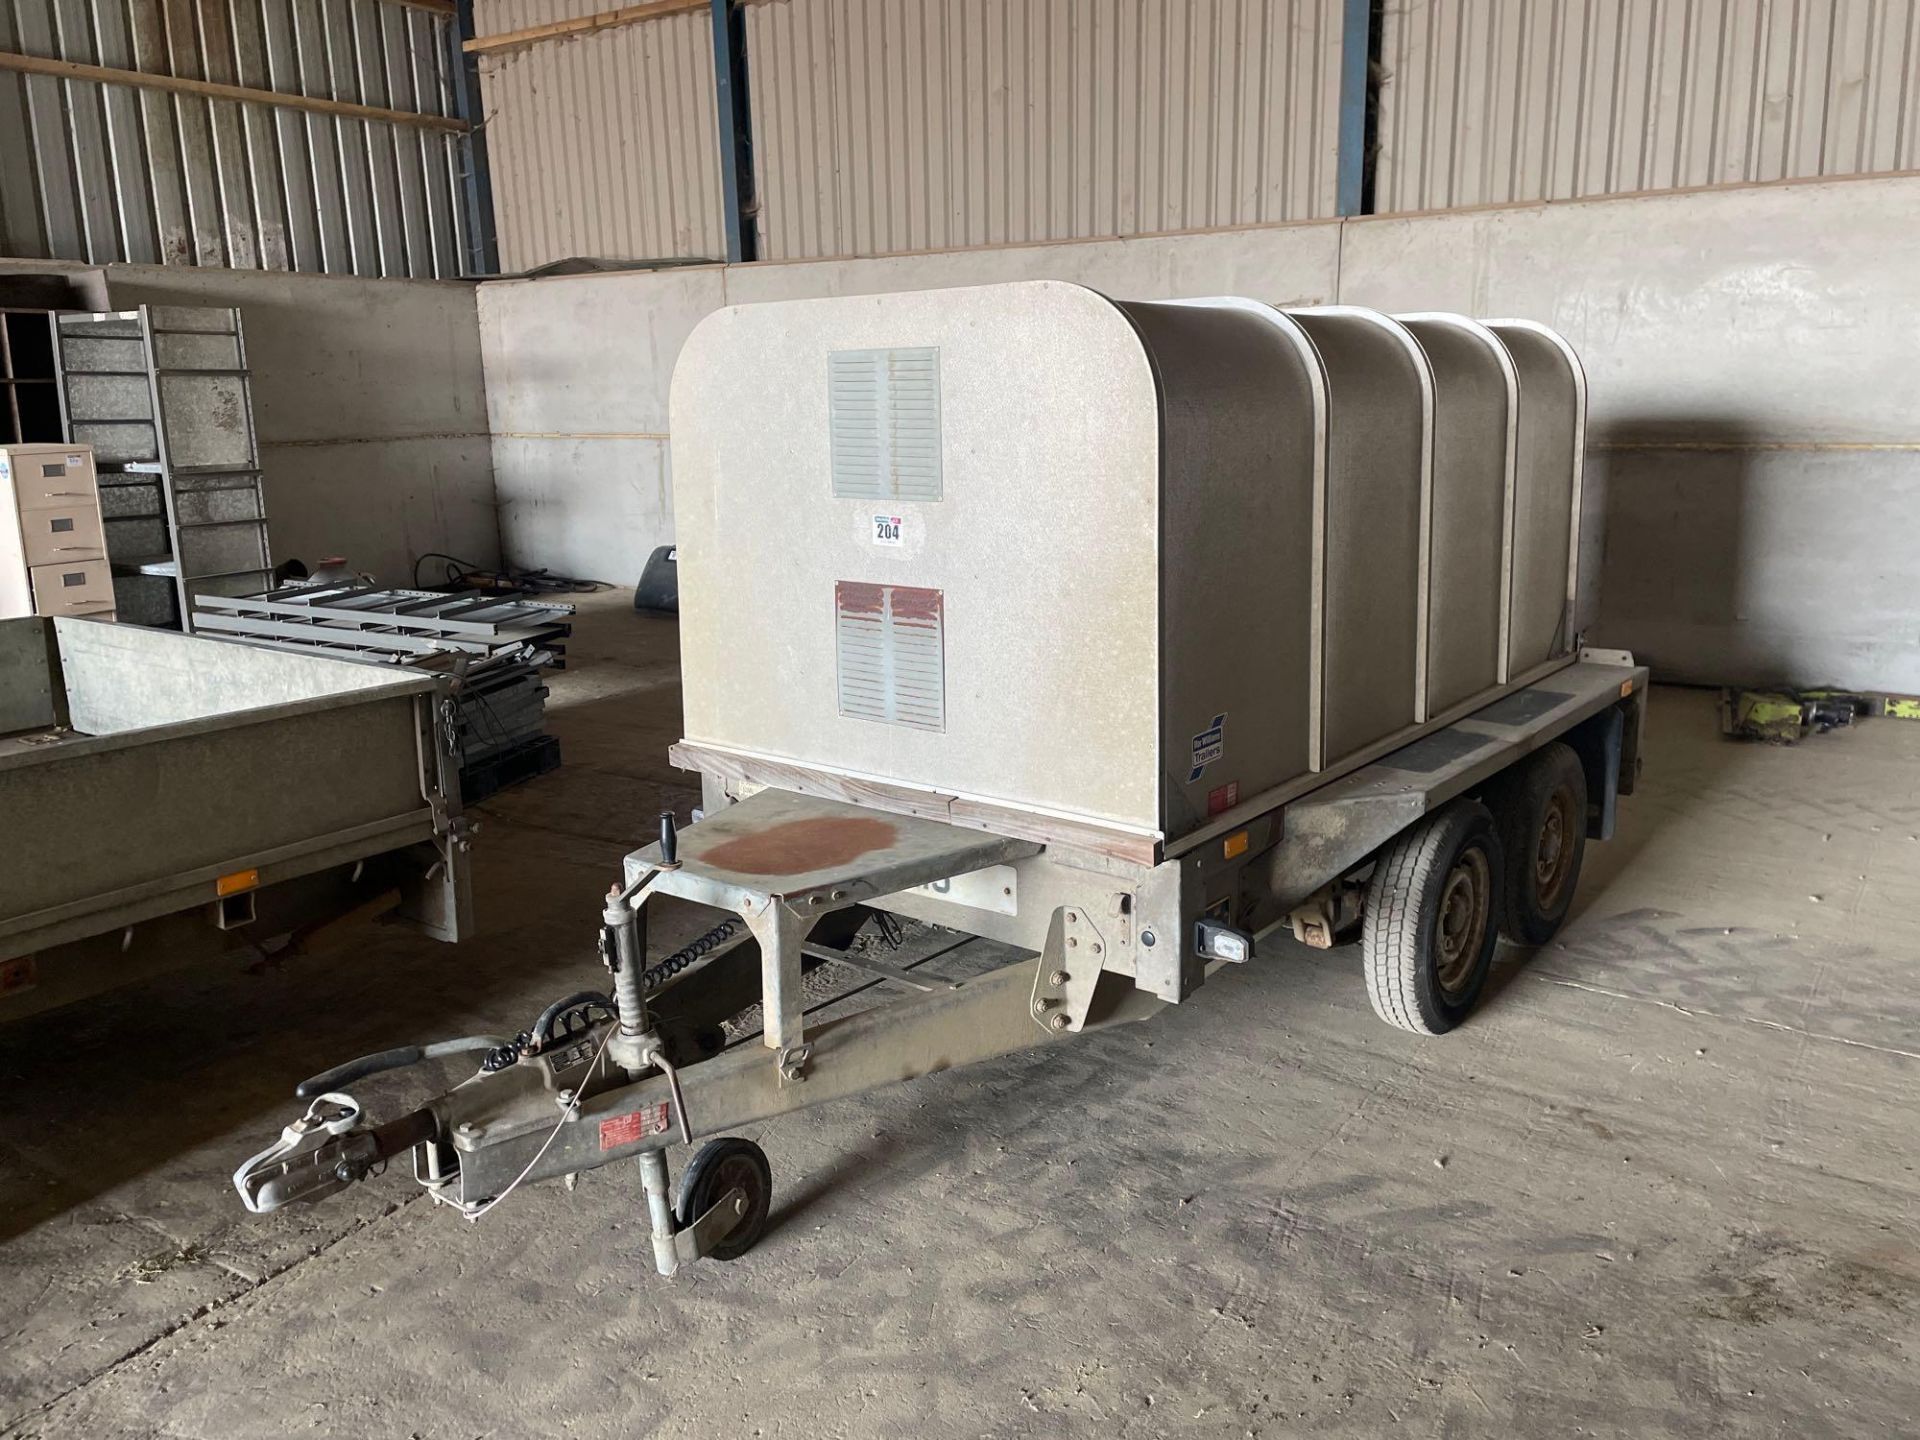 Ifor Williams CX84 2.7t twin axle trailer adapted with Ifor Williams canopy for calf/sheep trailer